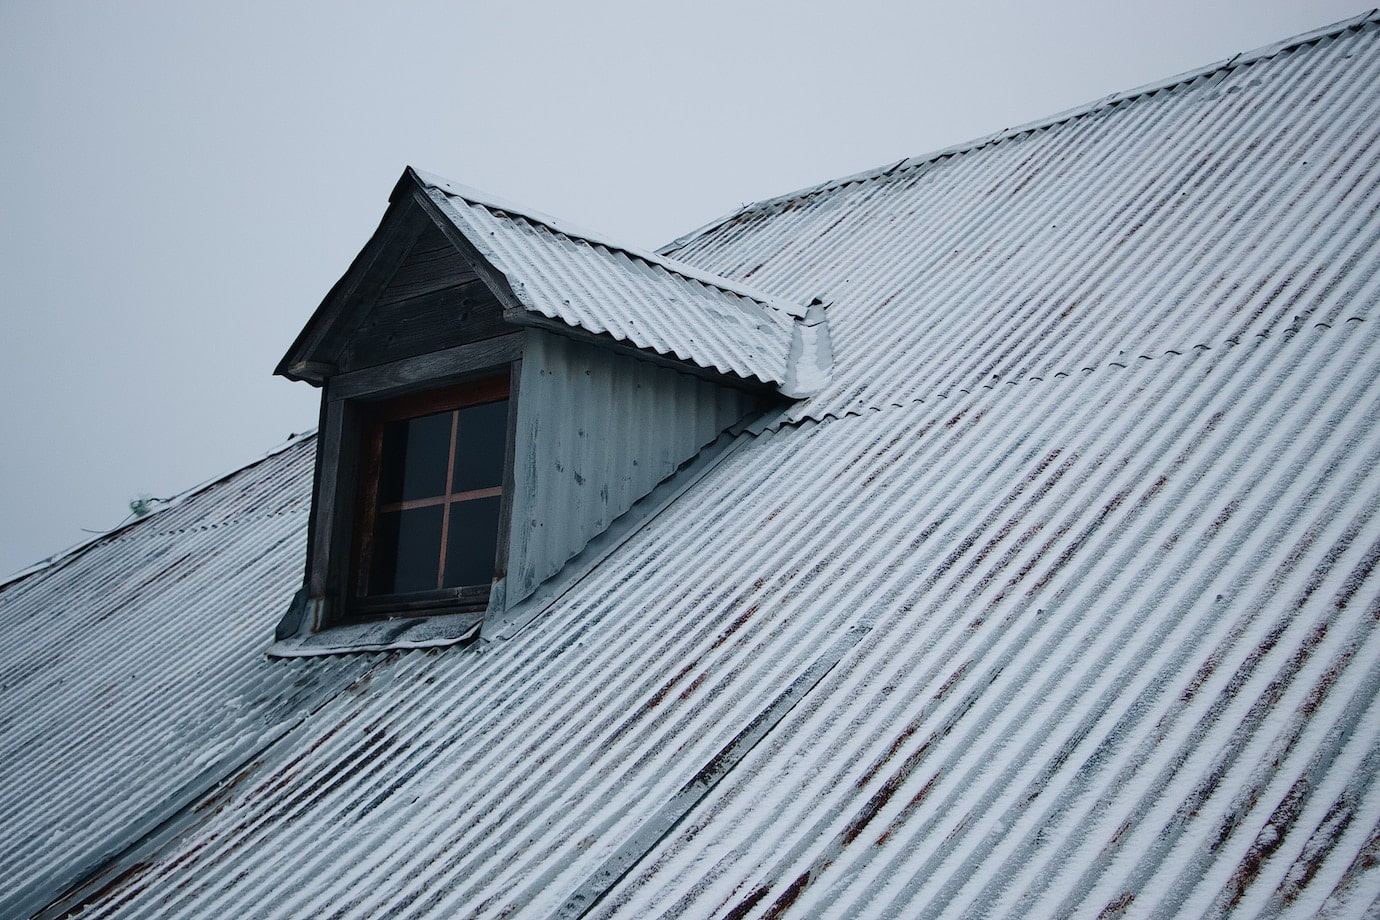 6 Signs It’s Time to Replace Your Roof: A Homeowner’s Checklist